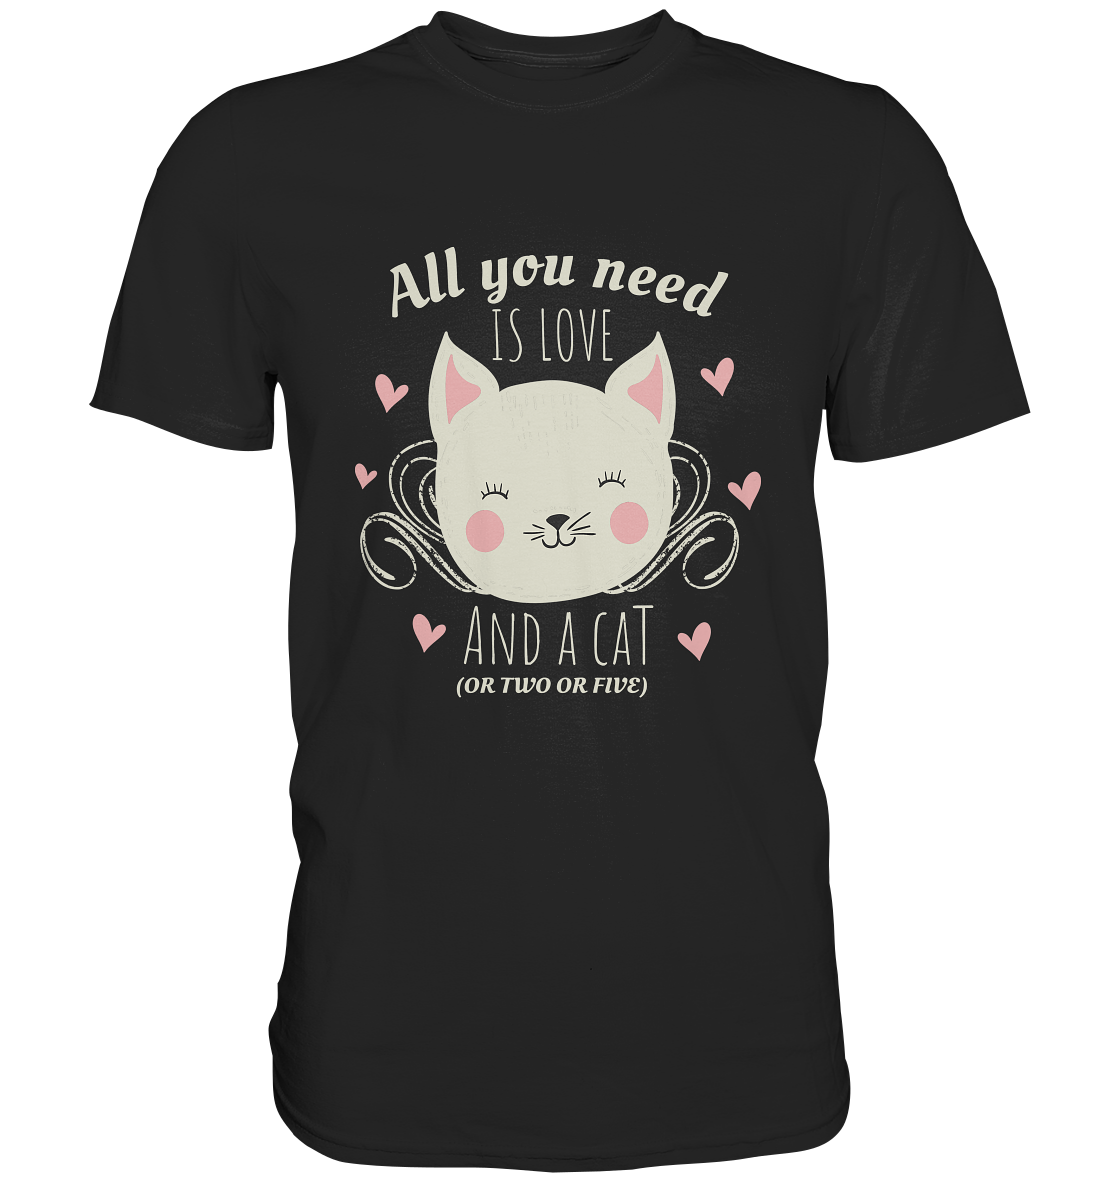 All you need is love and a cat. Katze - Premium Shirt